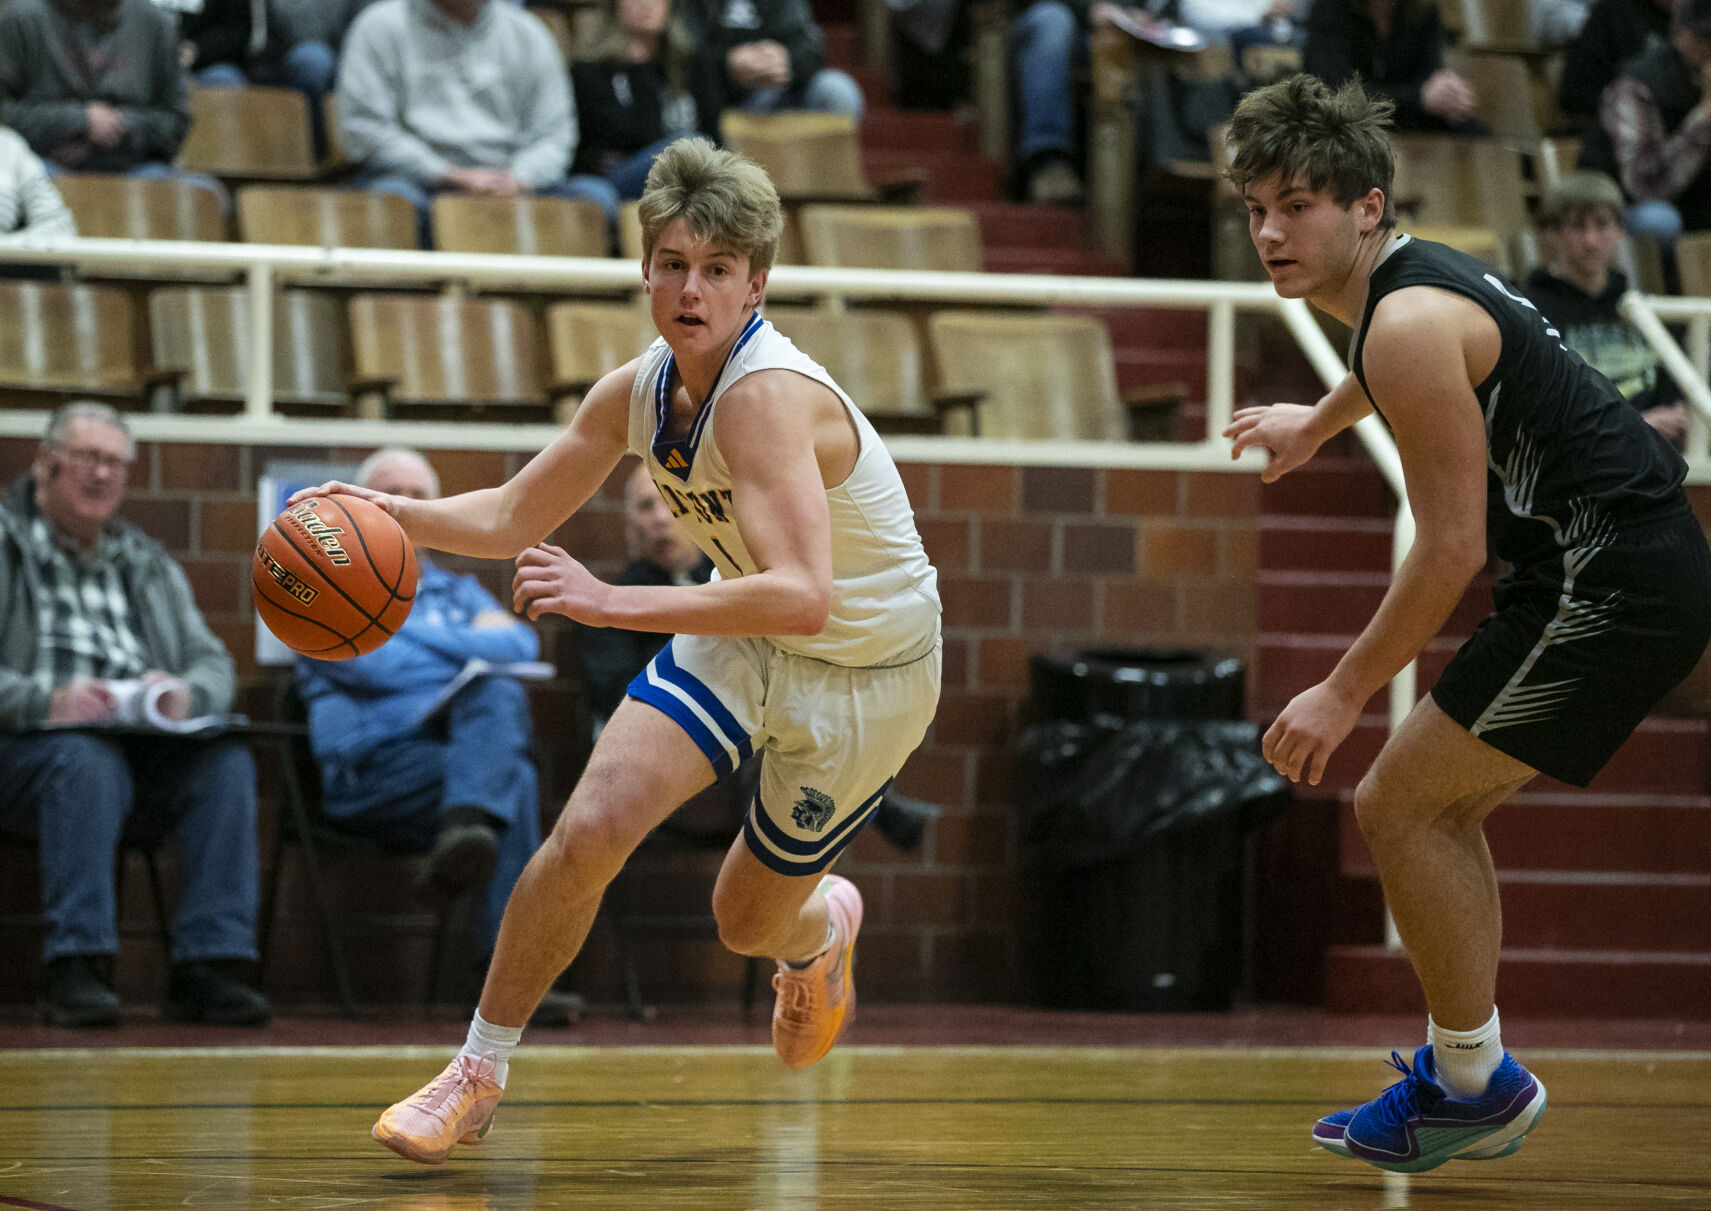 MUDECAS Boys Semifinals: Tri County and Freeman Advance to Semis